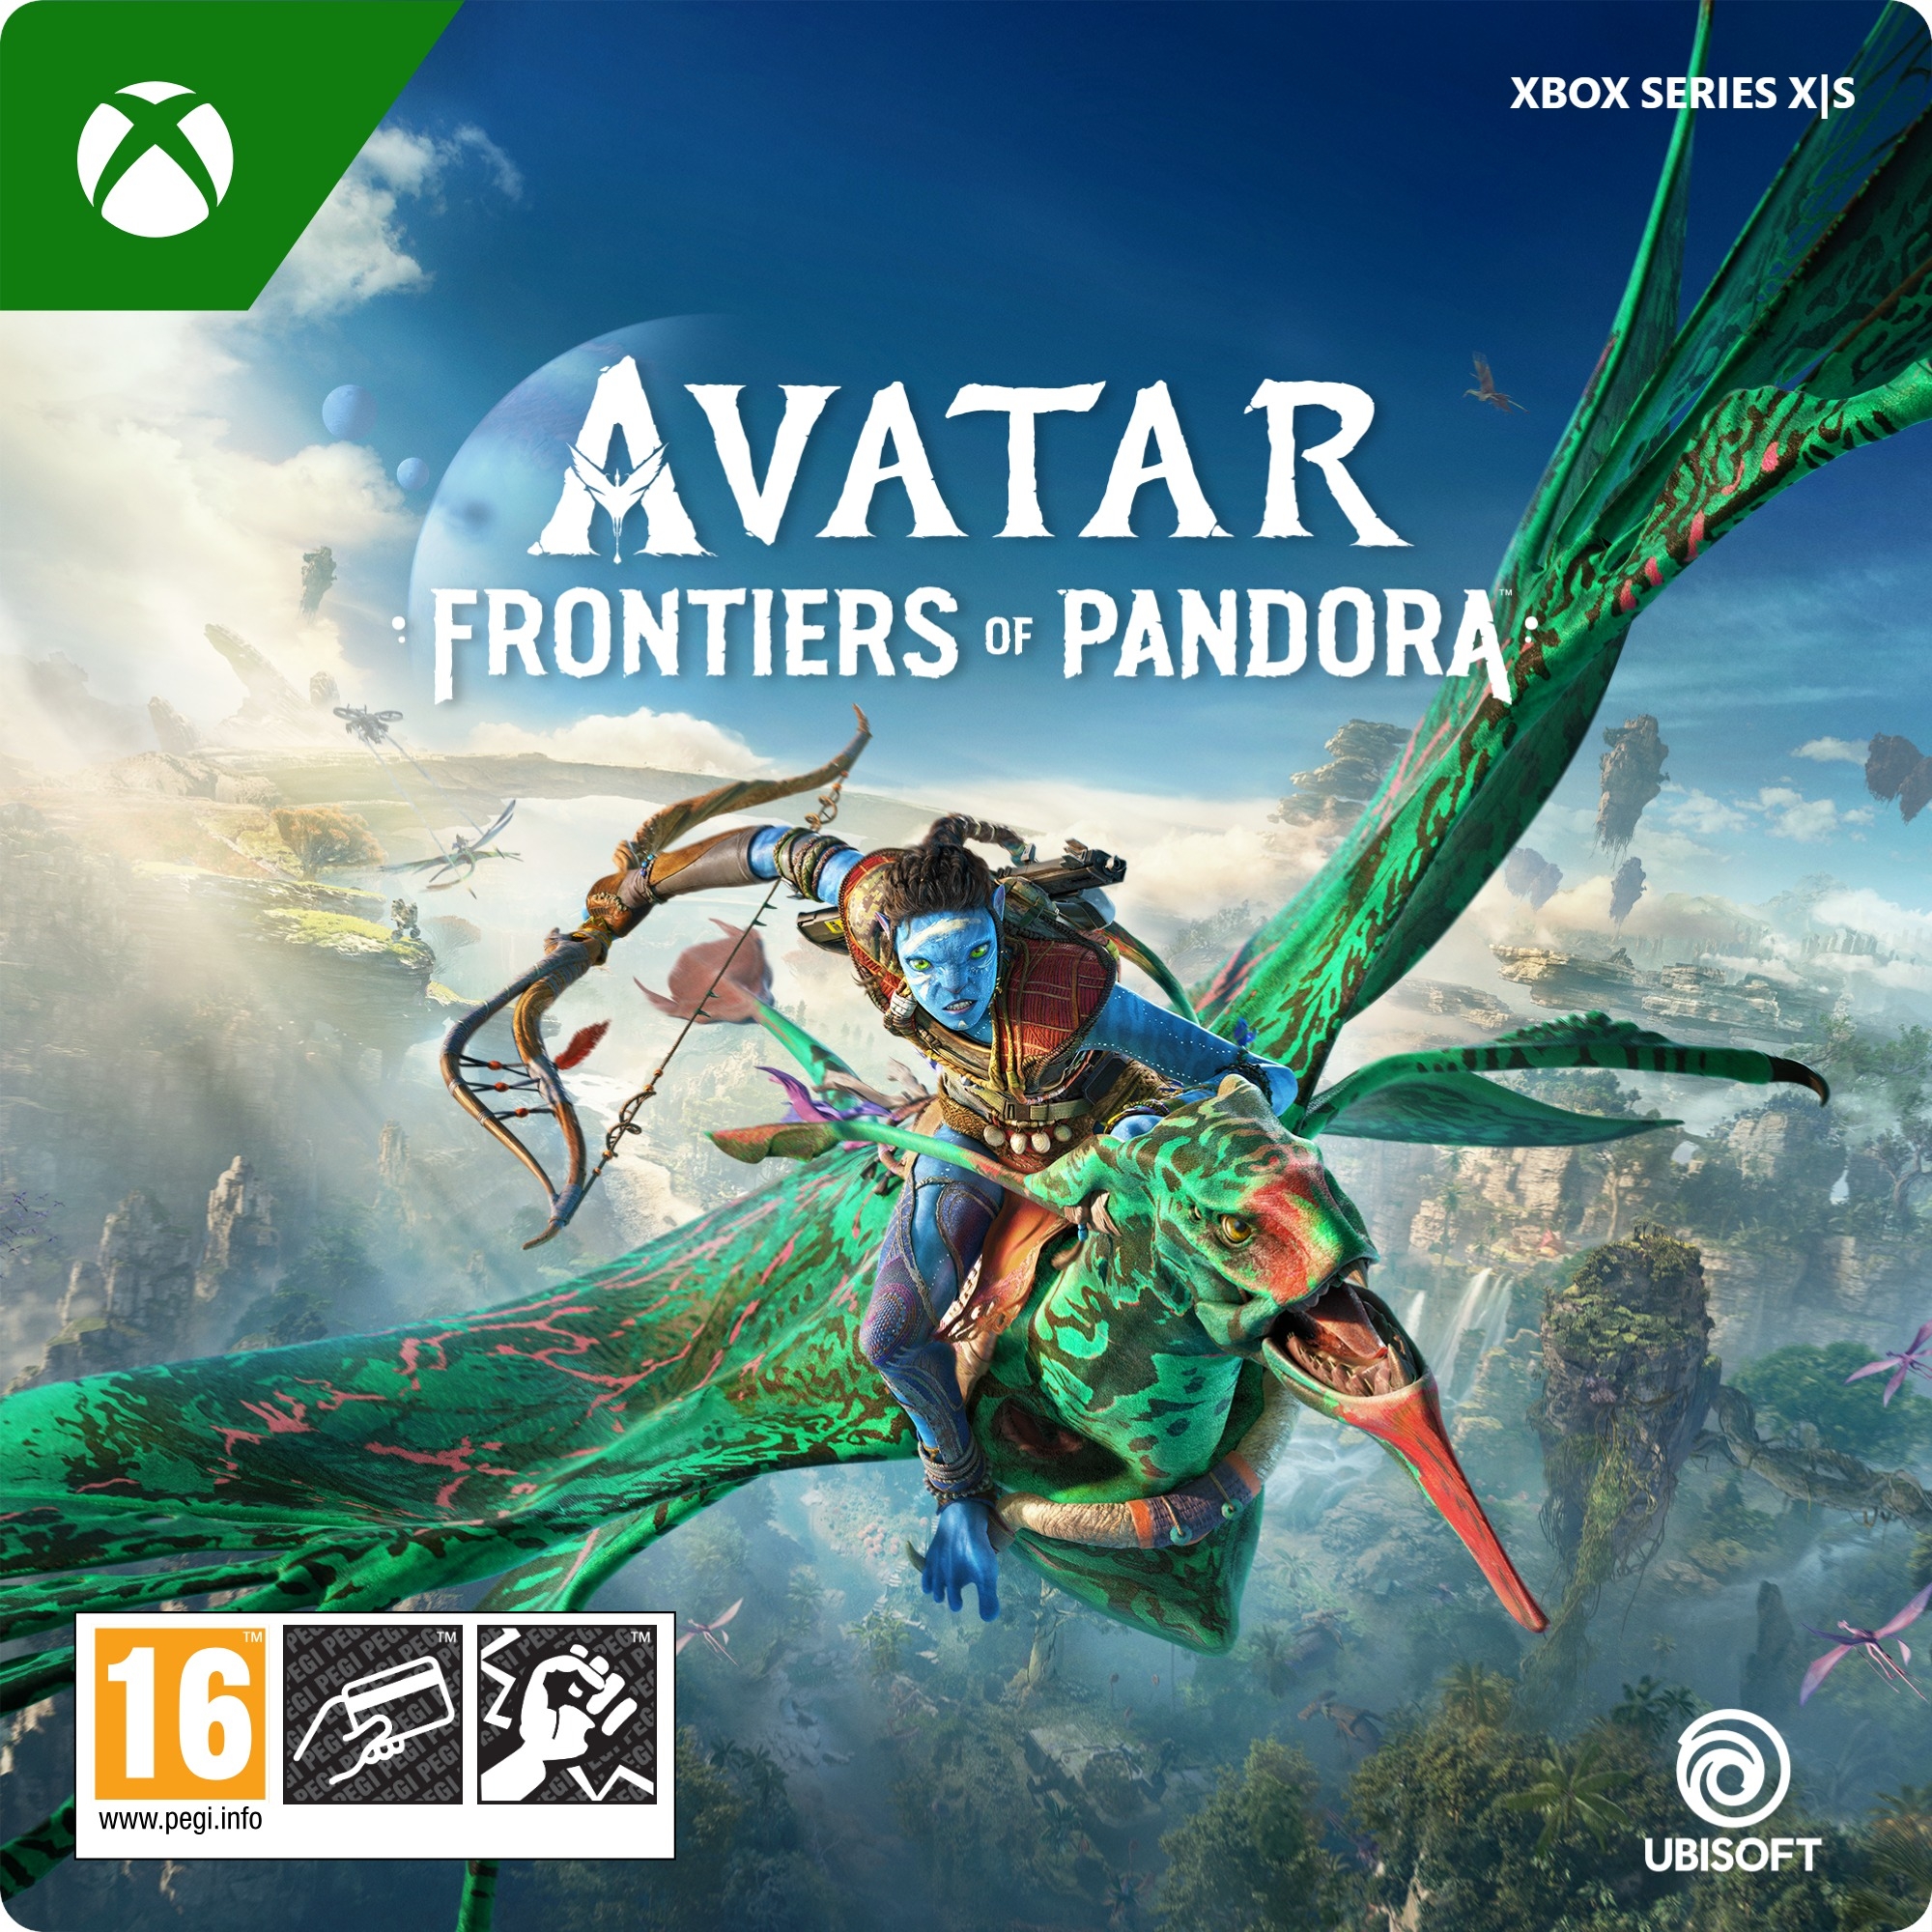 Avatar: Frontiers of Pandora Standard Edition - Xbox Series X|S (digitale game) GamesDirect®